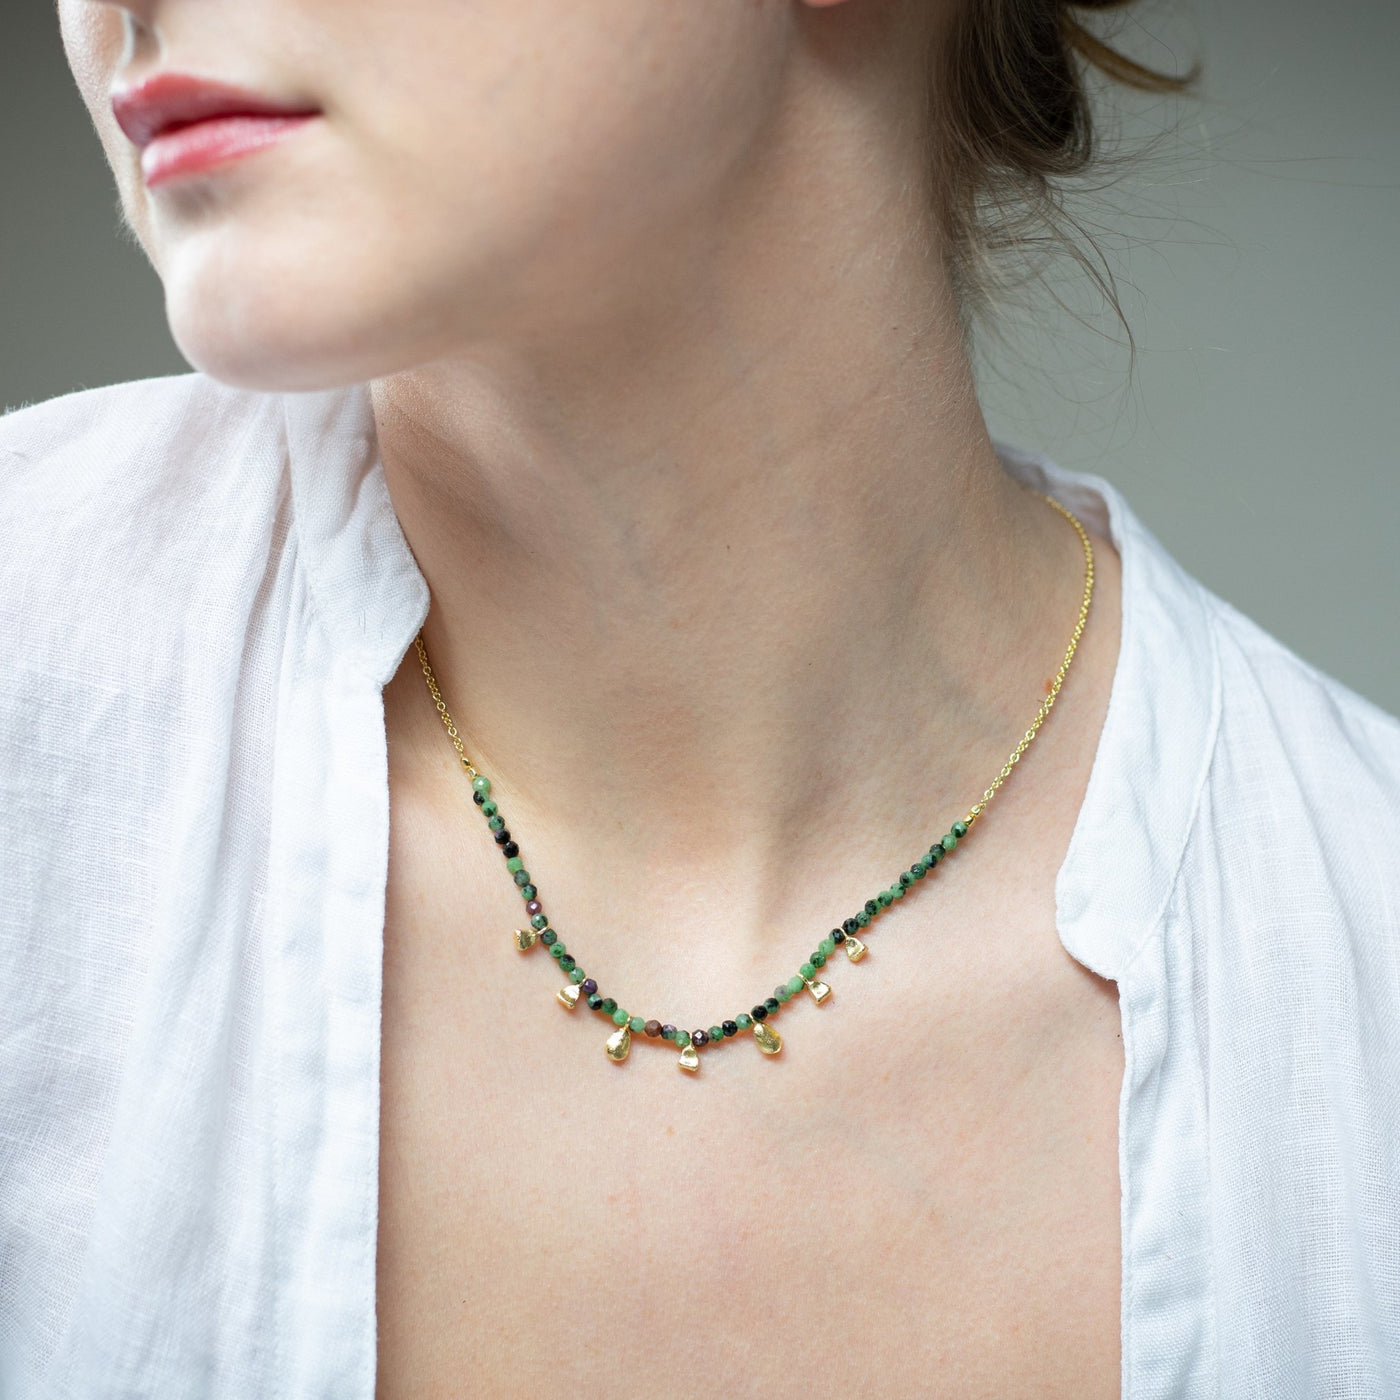 Green Gemstone Necklace in Gold - Maral Kunst Jewelry